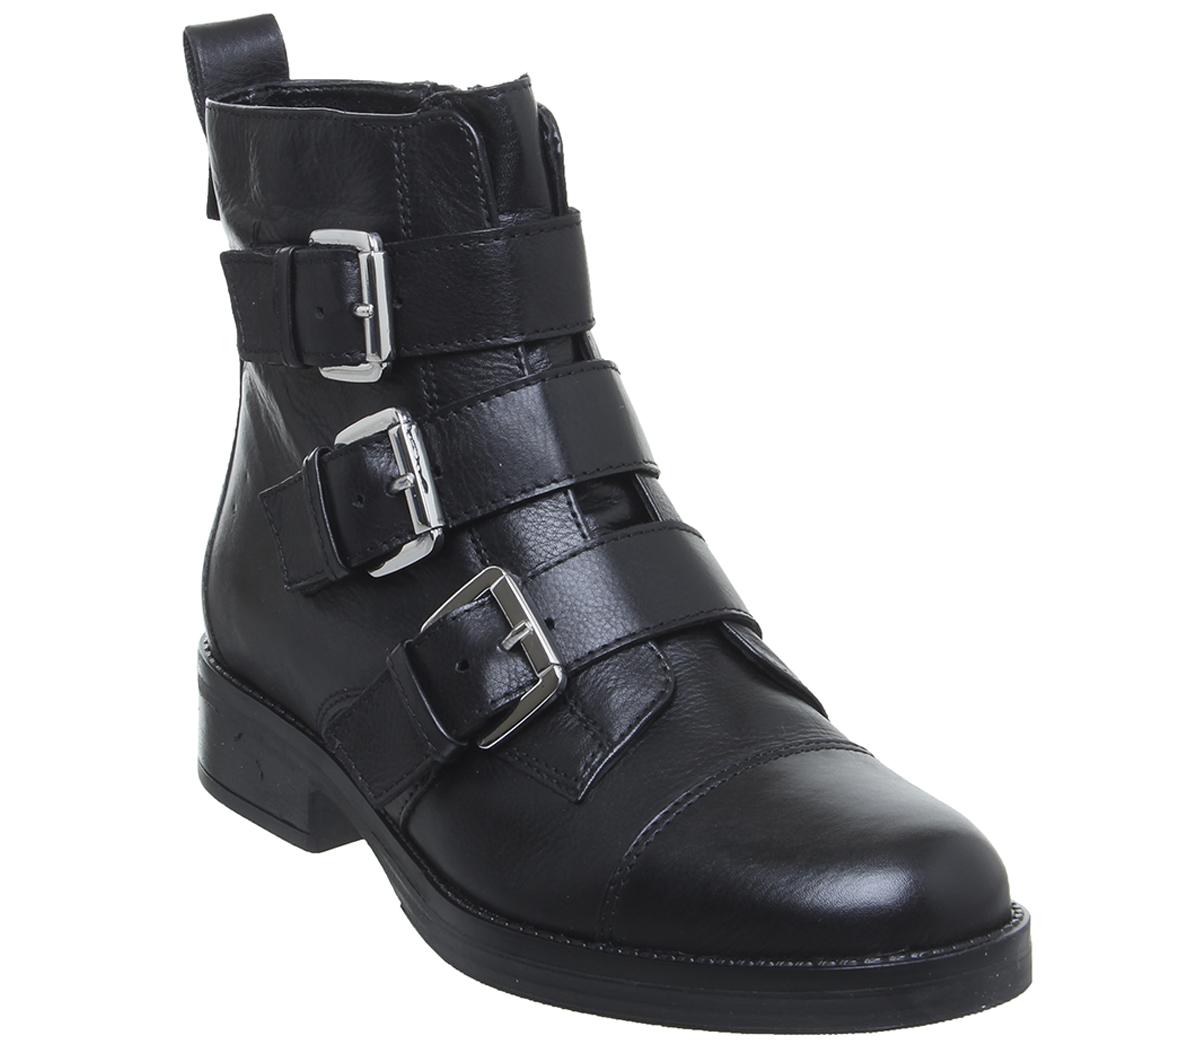 OFFICE Anticipate Buckle Biker Boots Black Leather - Women's Ankle Boots